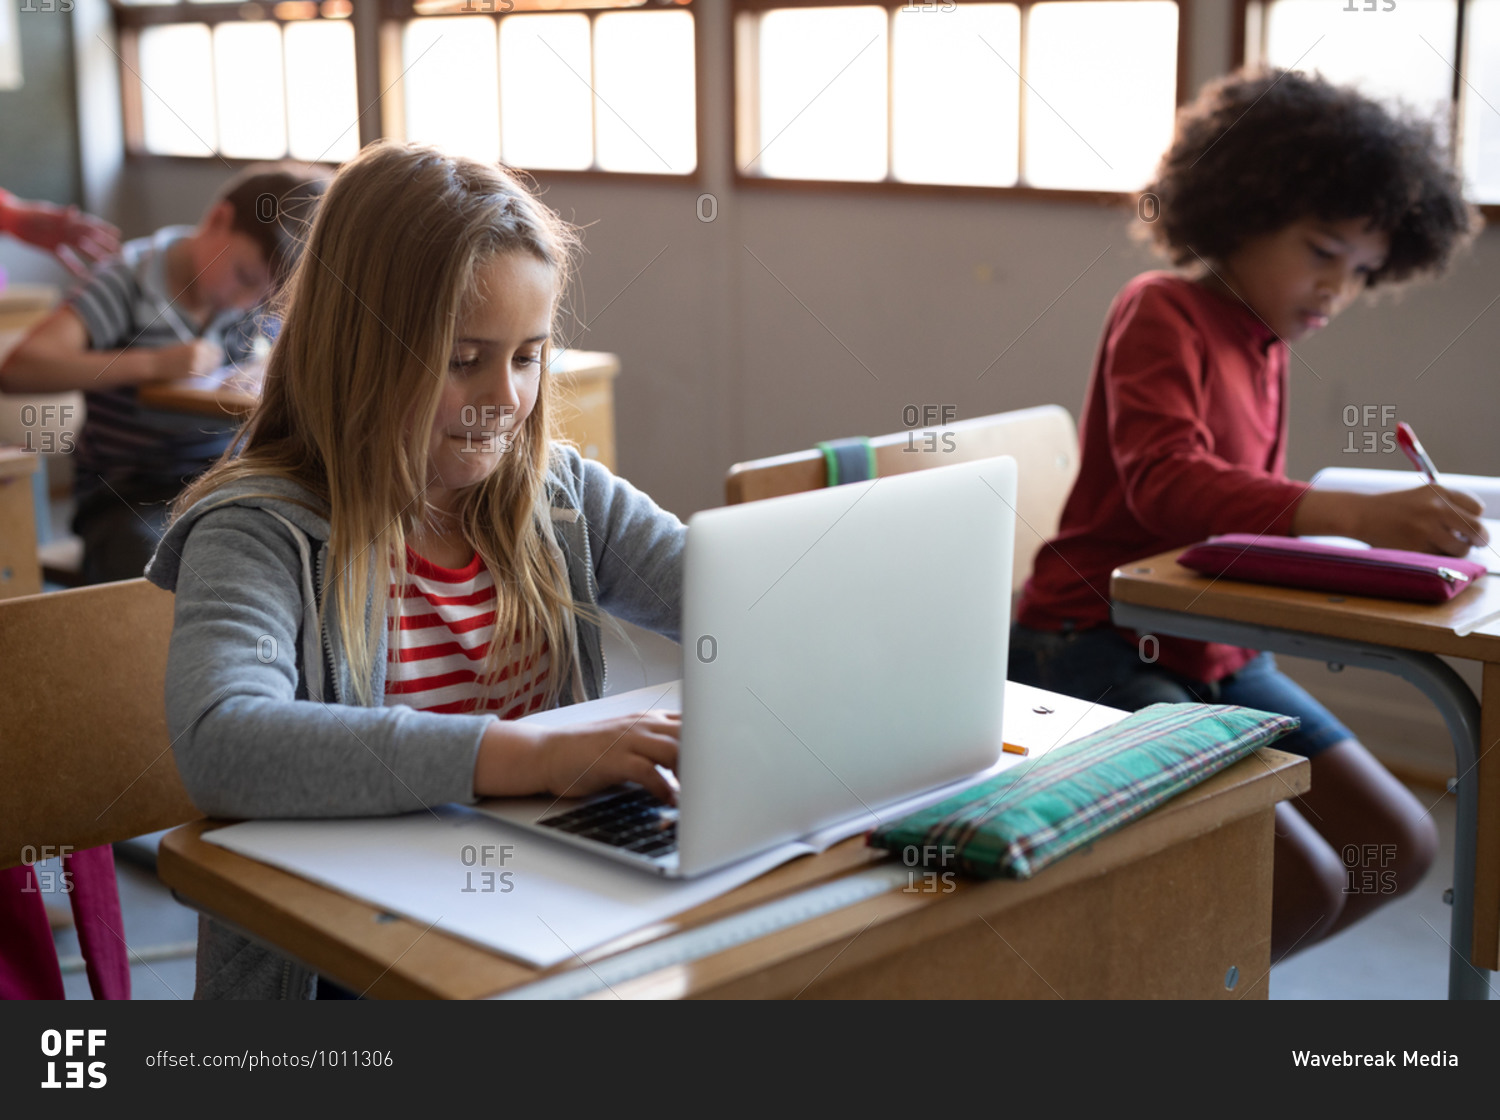 Caucasian girl using laptop during the lesson. Primary education social distancing health safety during Covid19 Coronavirus pandemic.